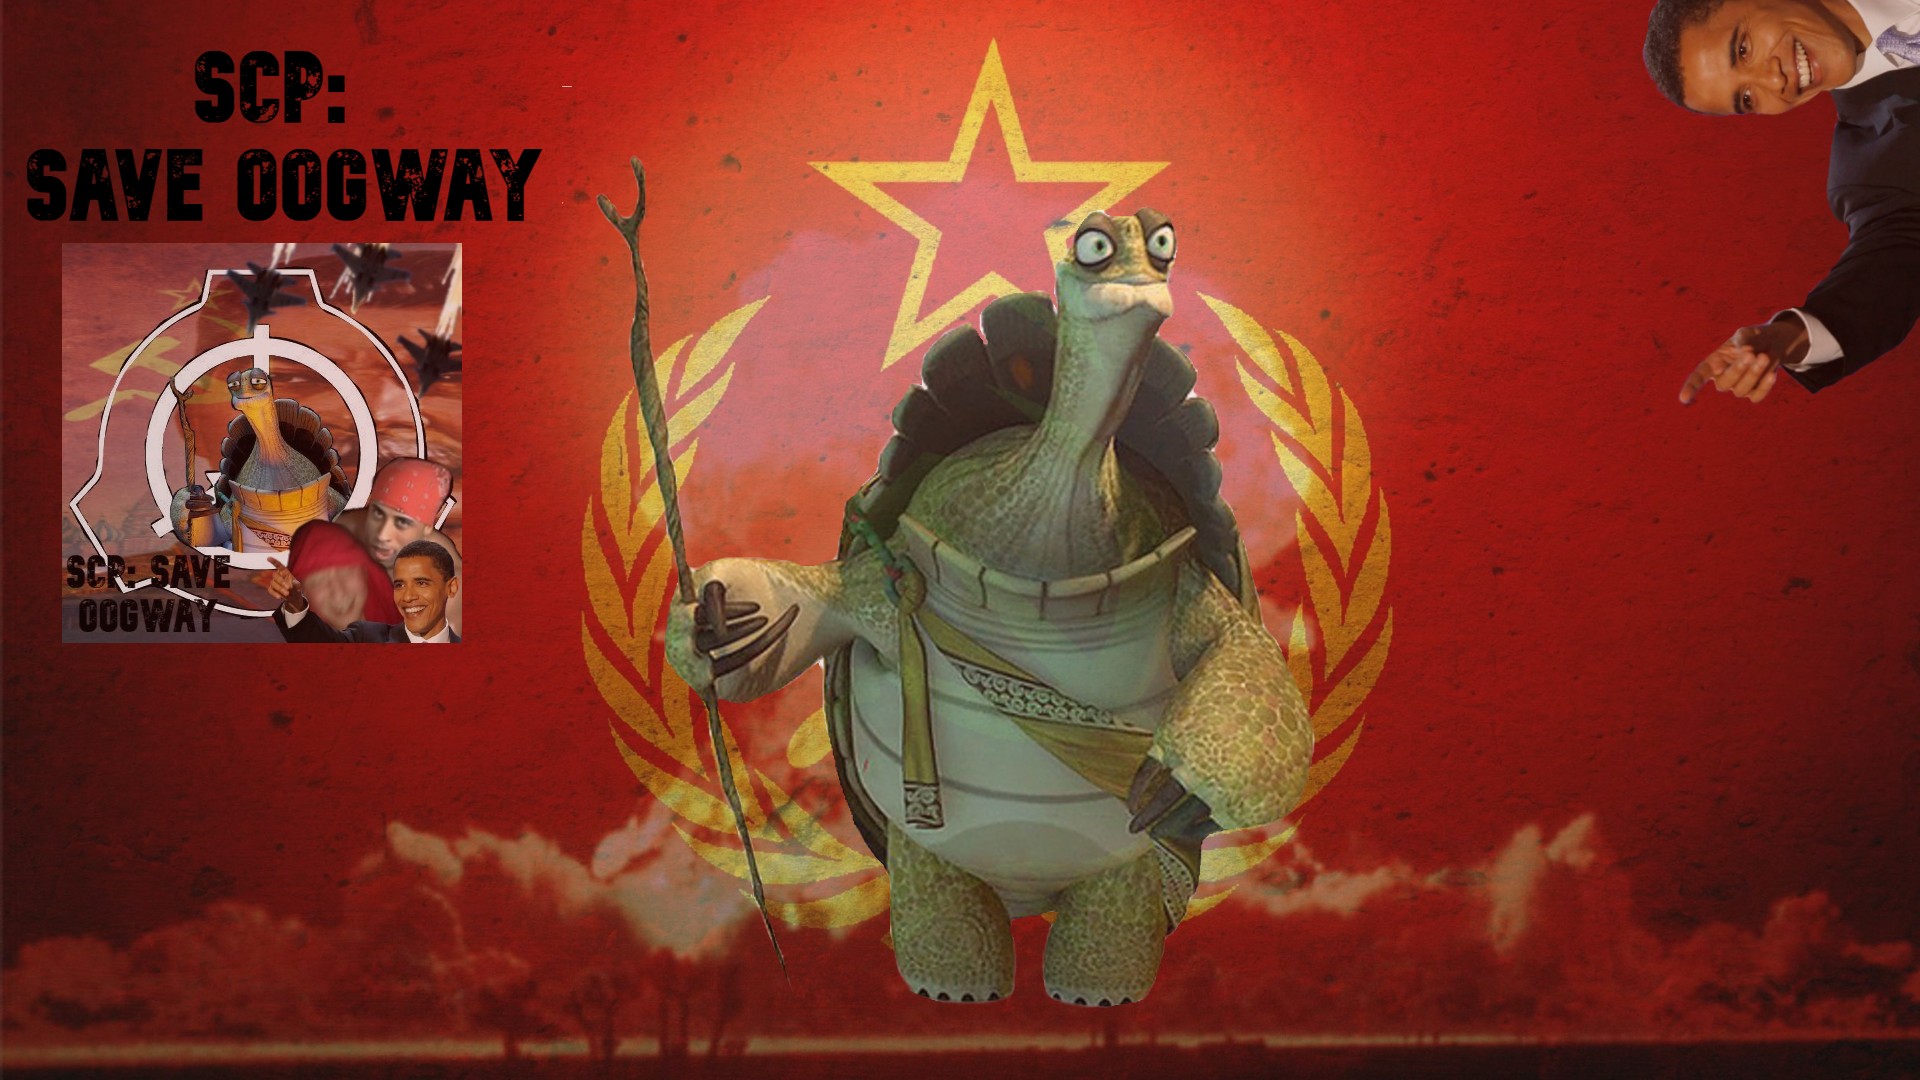 Scp: save oogway